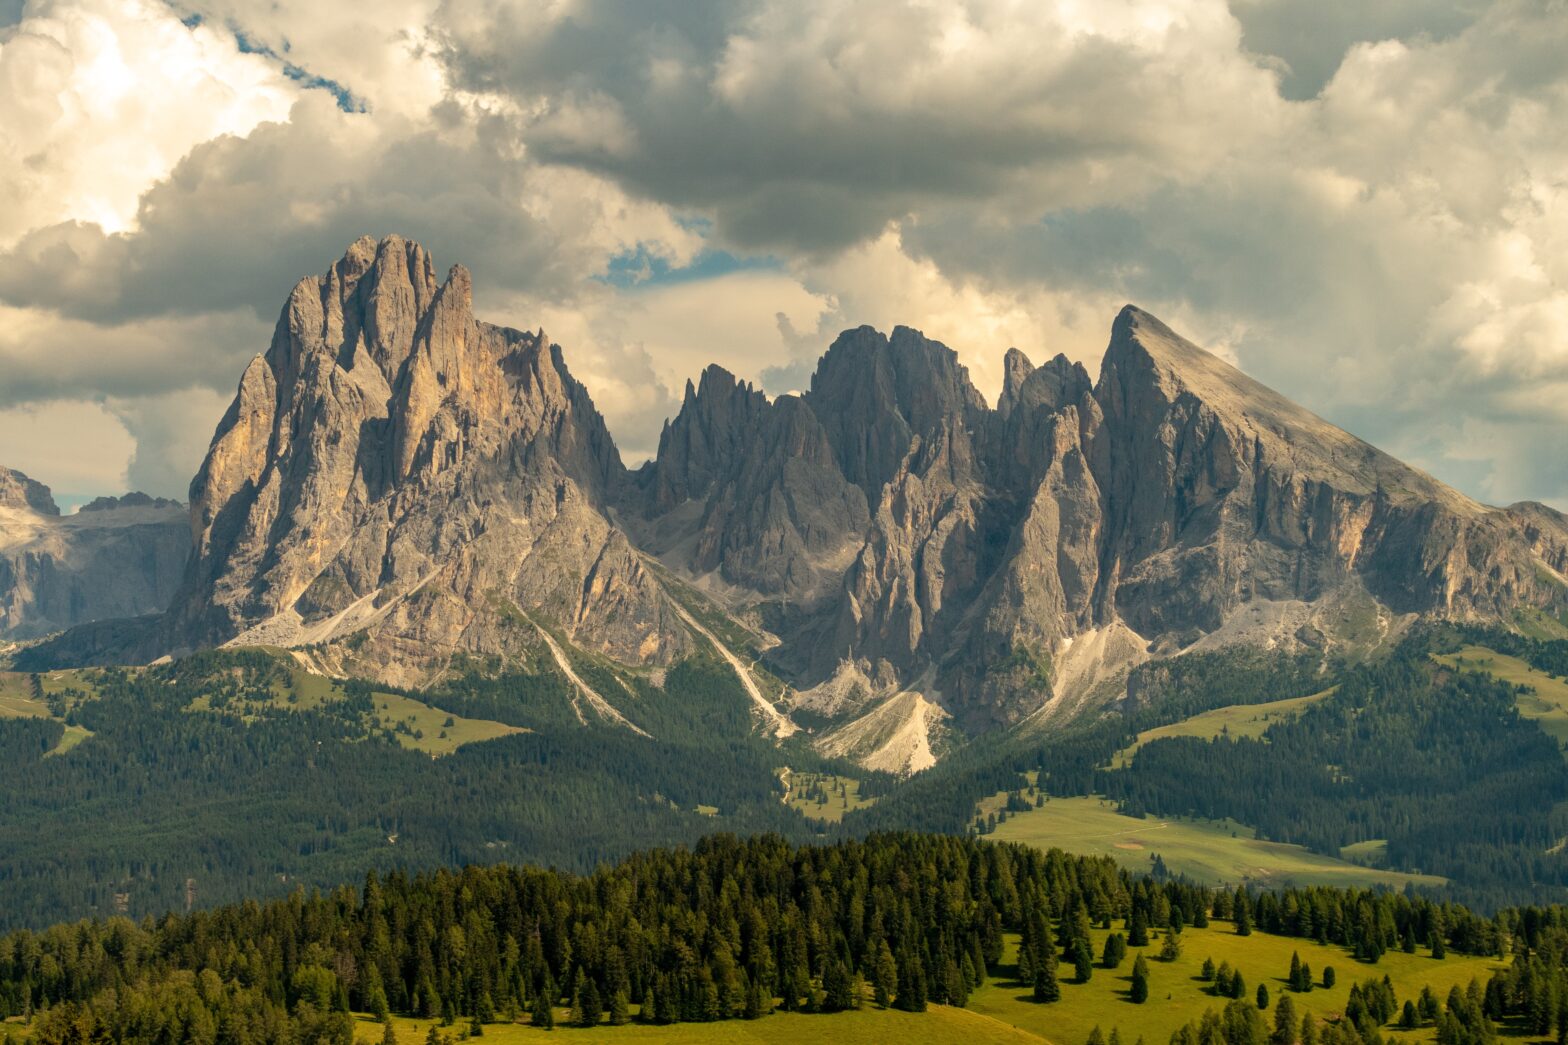 A Guide To Visiting the Dolomites in Italy